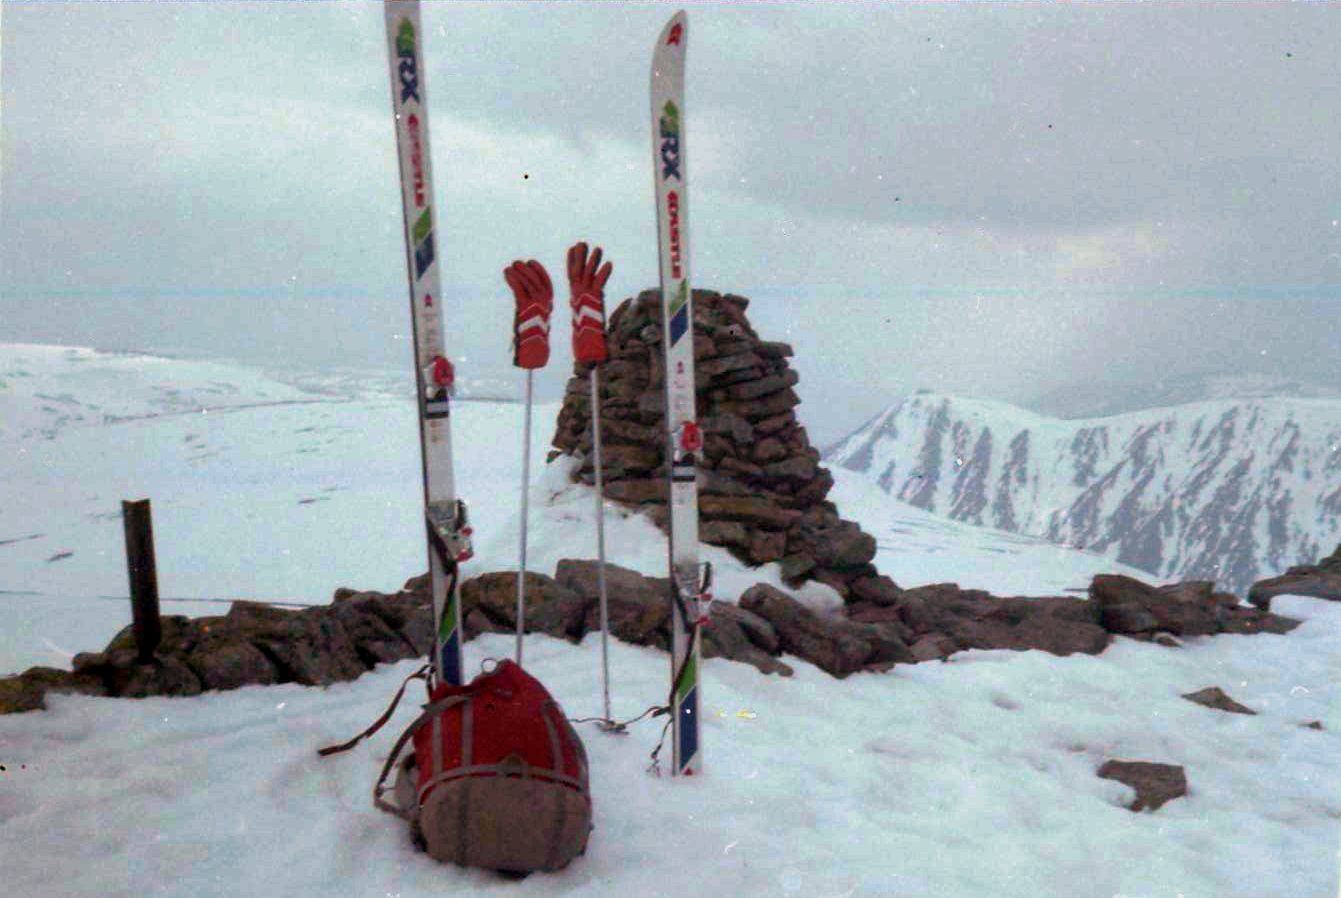 Ski traverse of Cairn of Claise